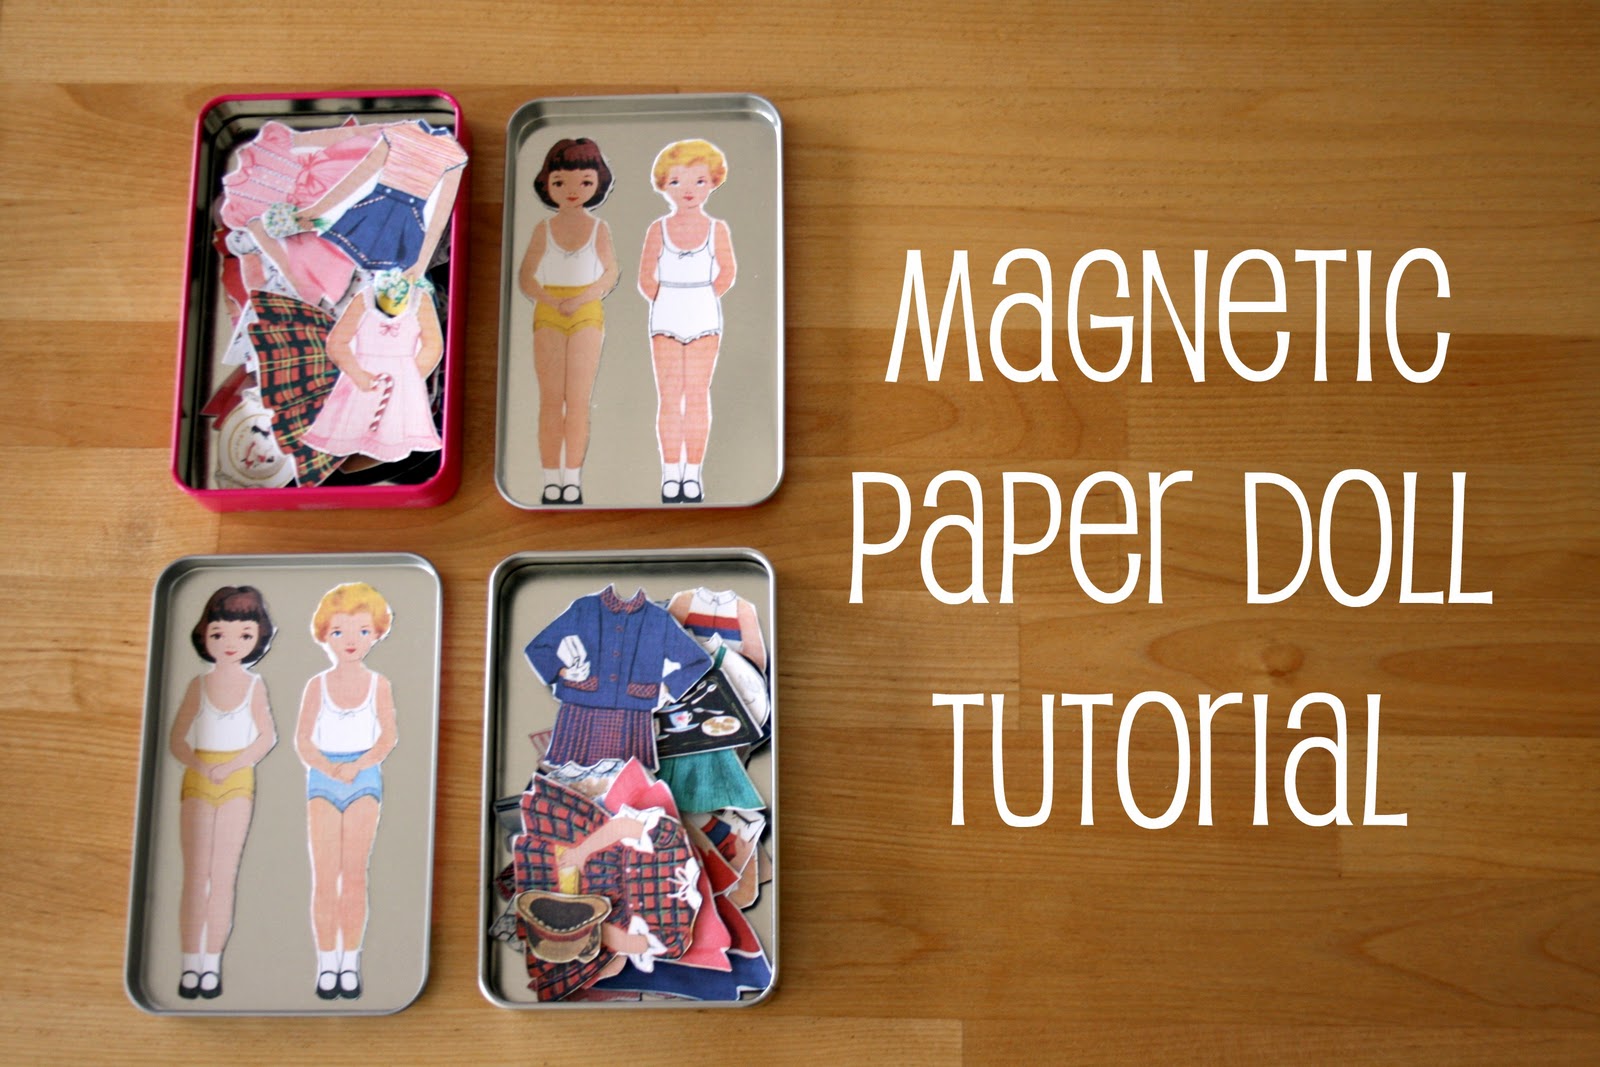 French Press Knits: Magnetic Paper Dolls Tutorial